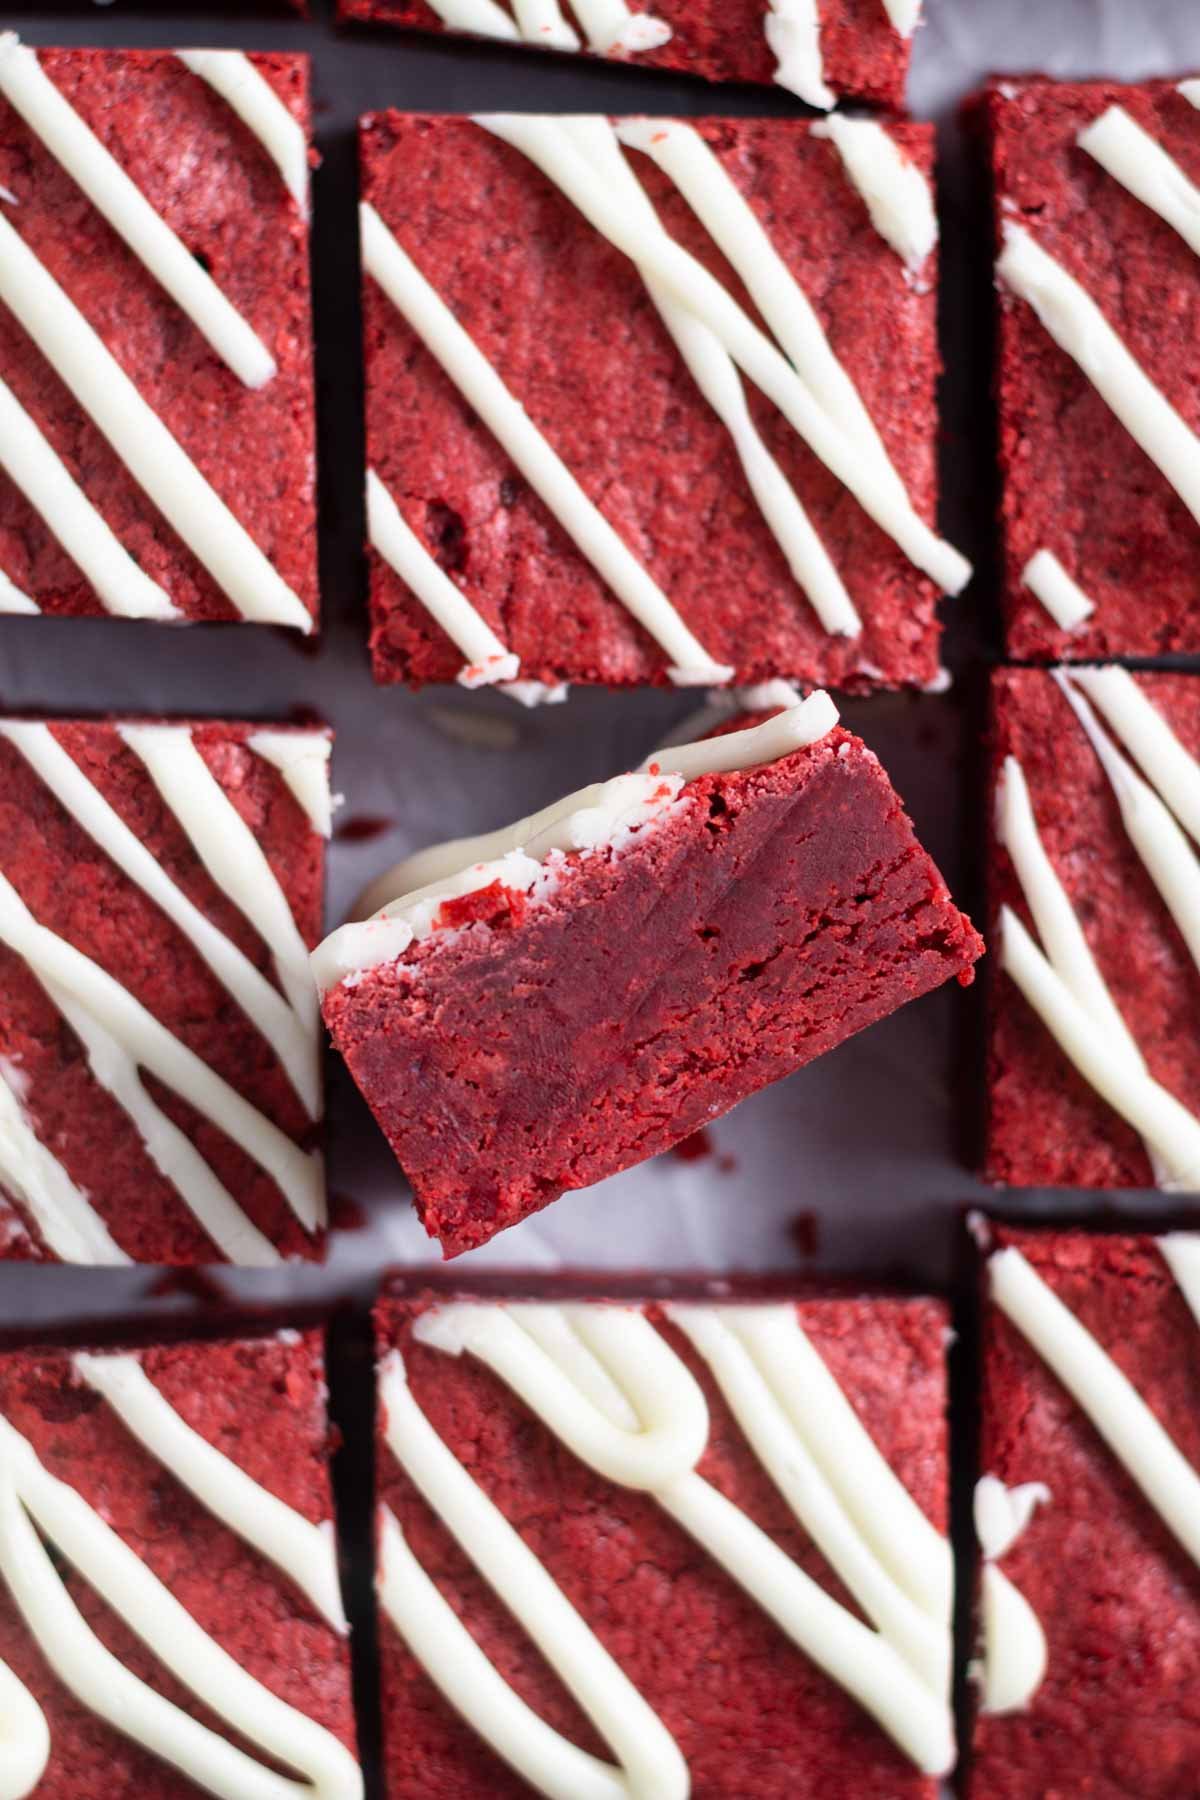 red velvet brownies on parchment paper showing inside texture